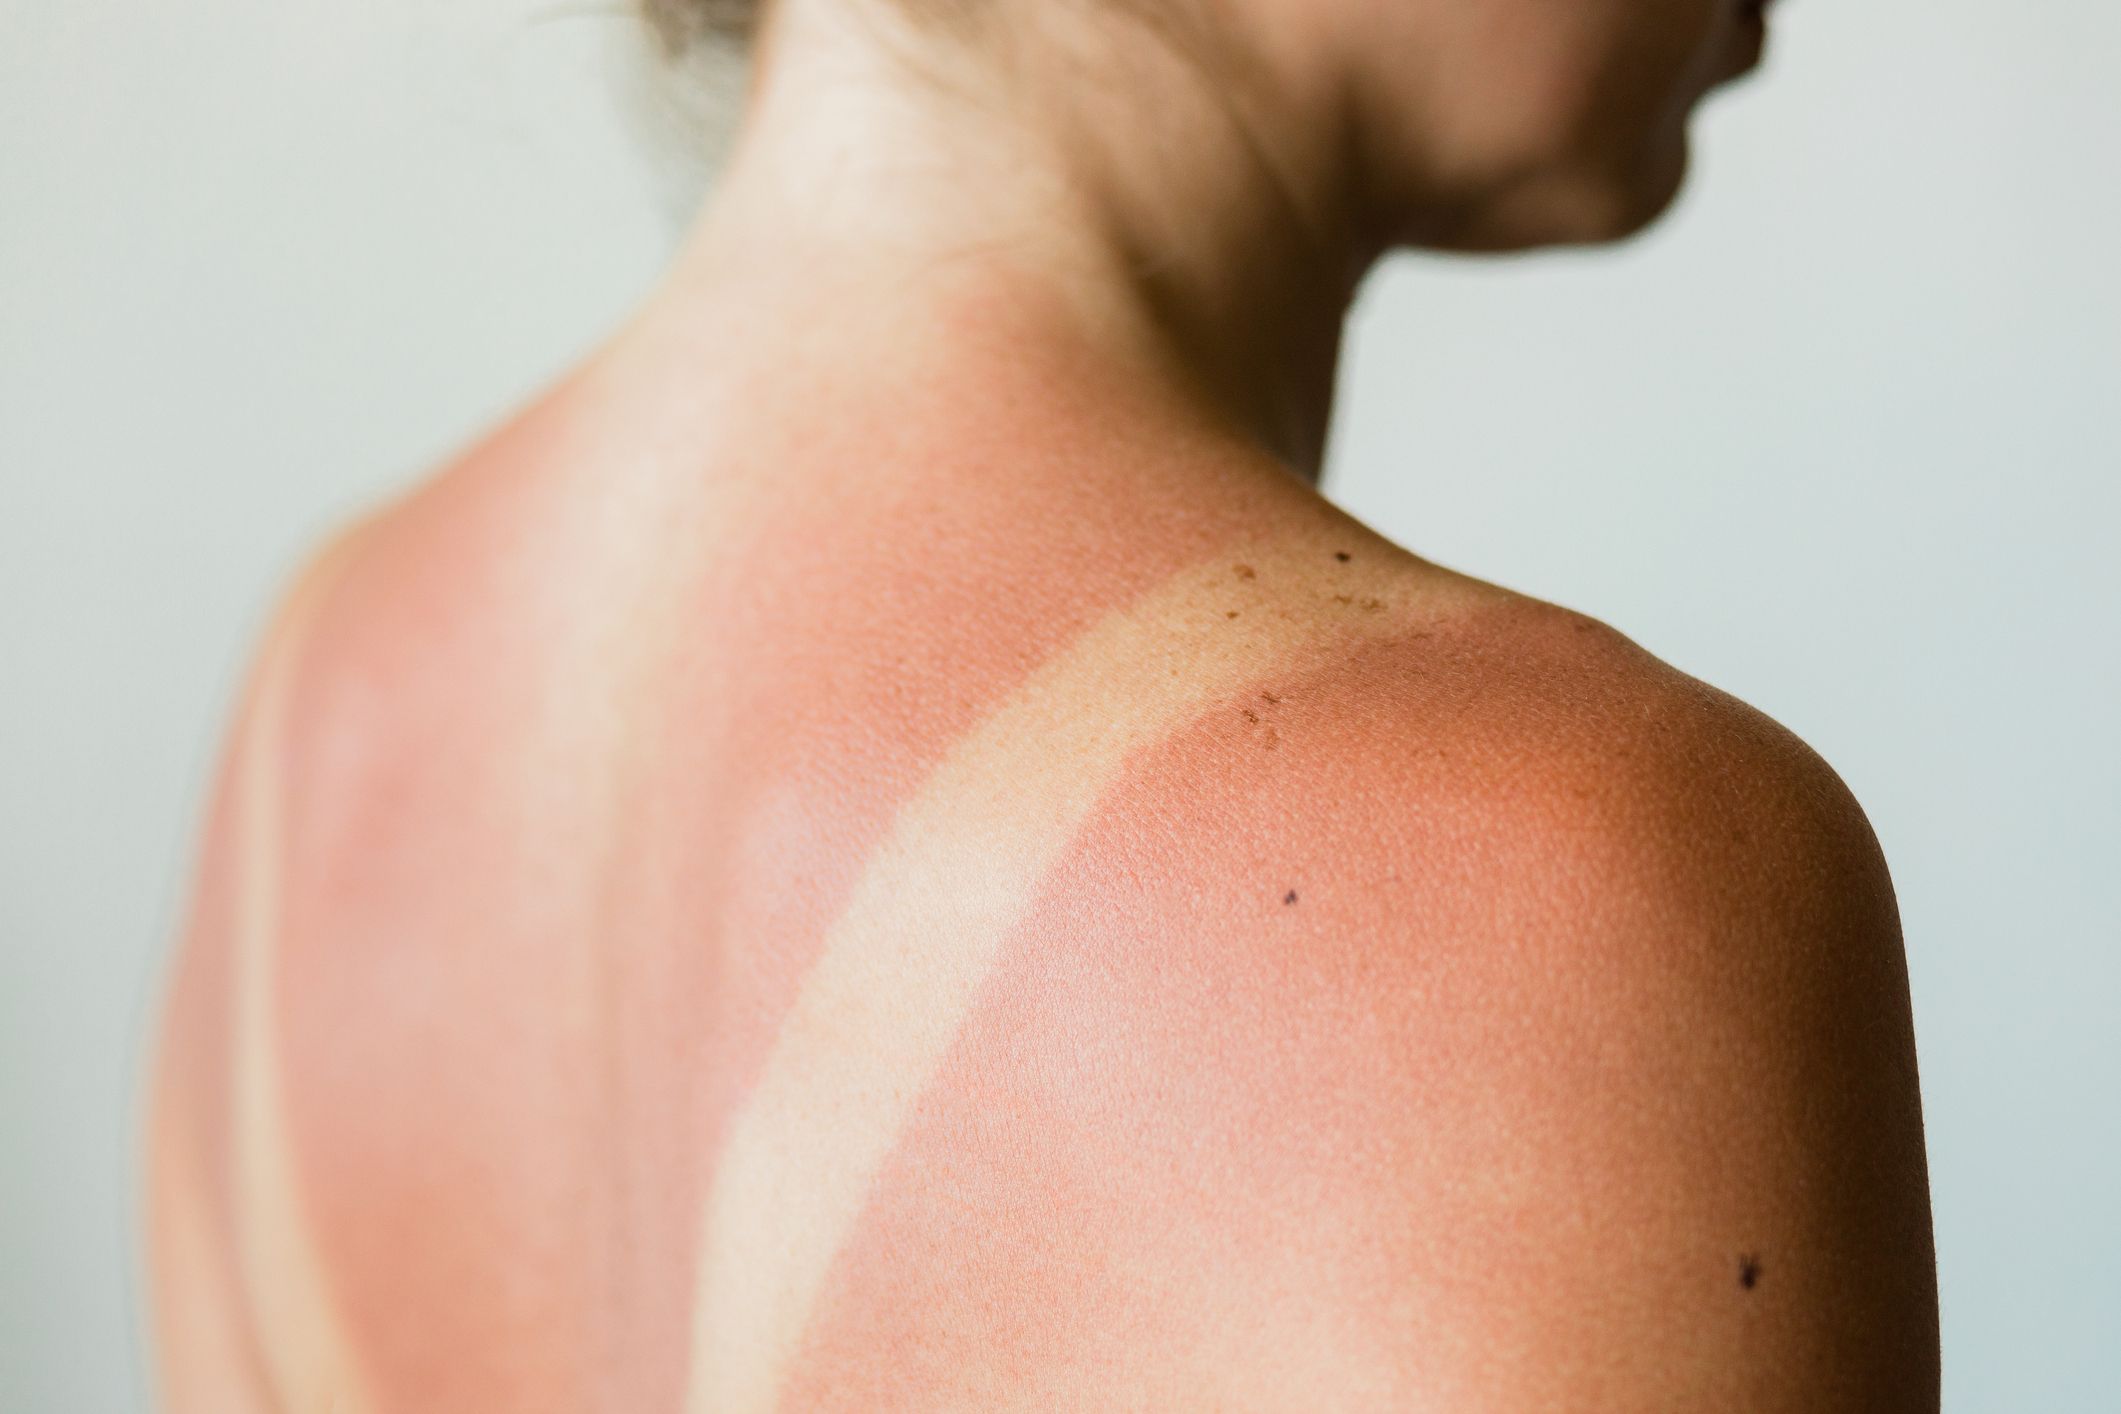 Do These Common Sunburn Remedies Actually Work?